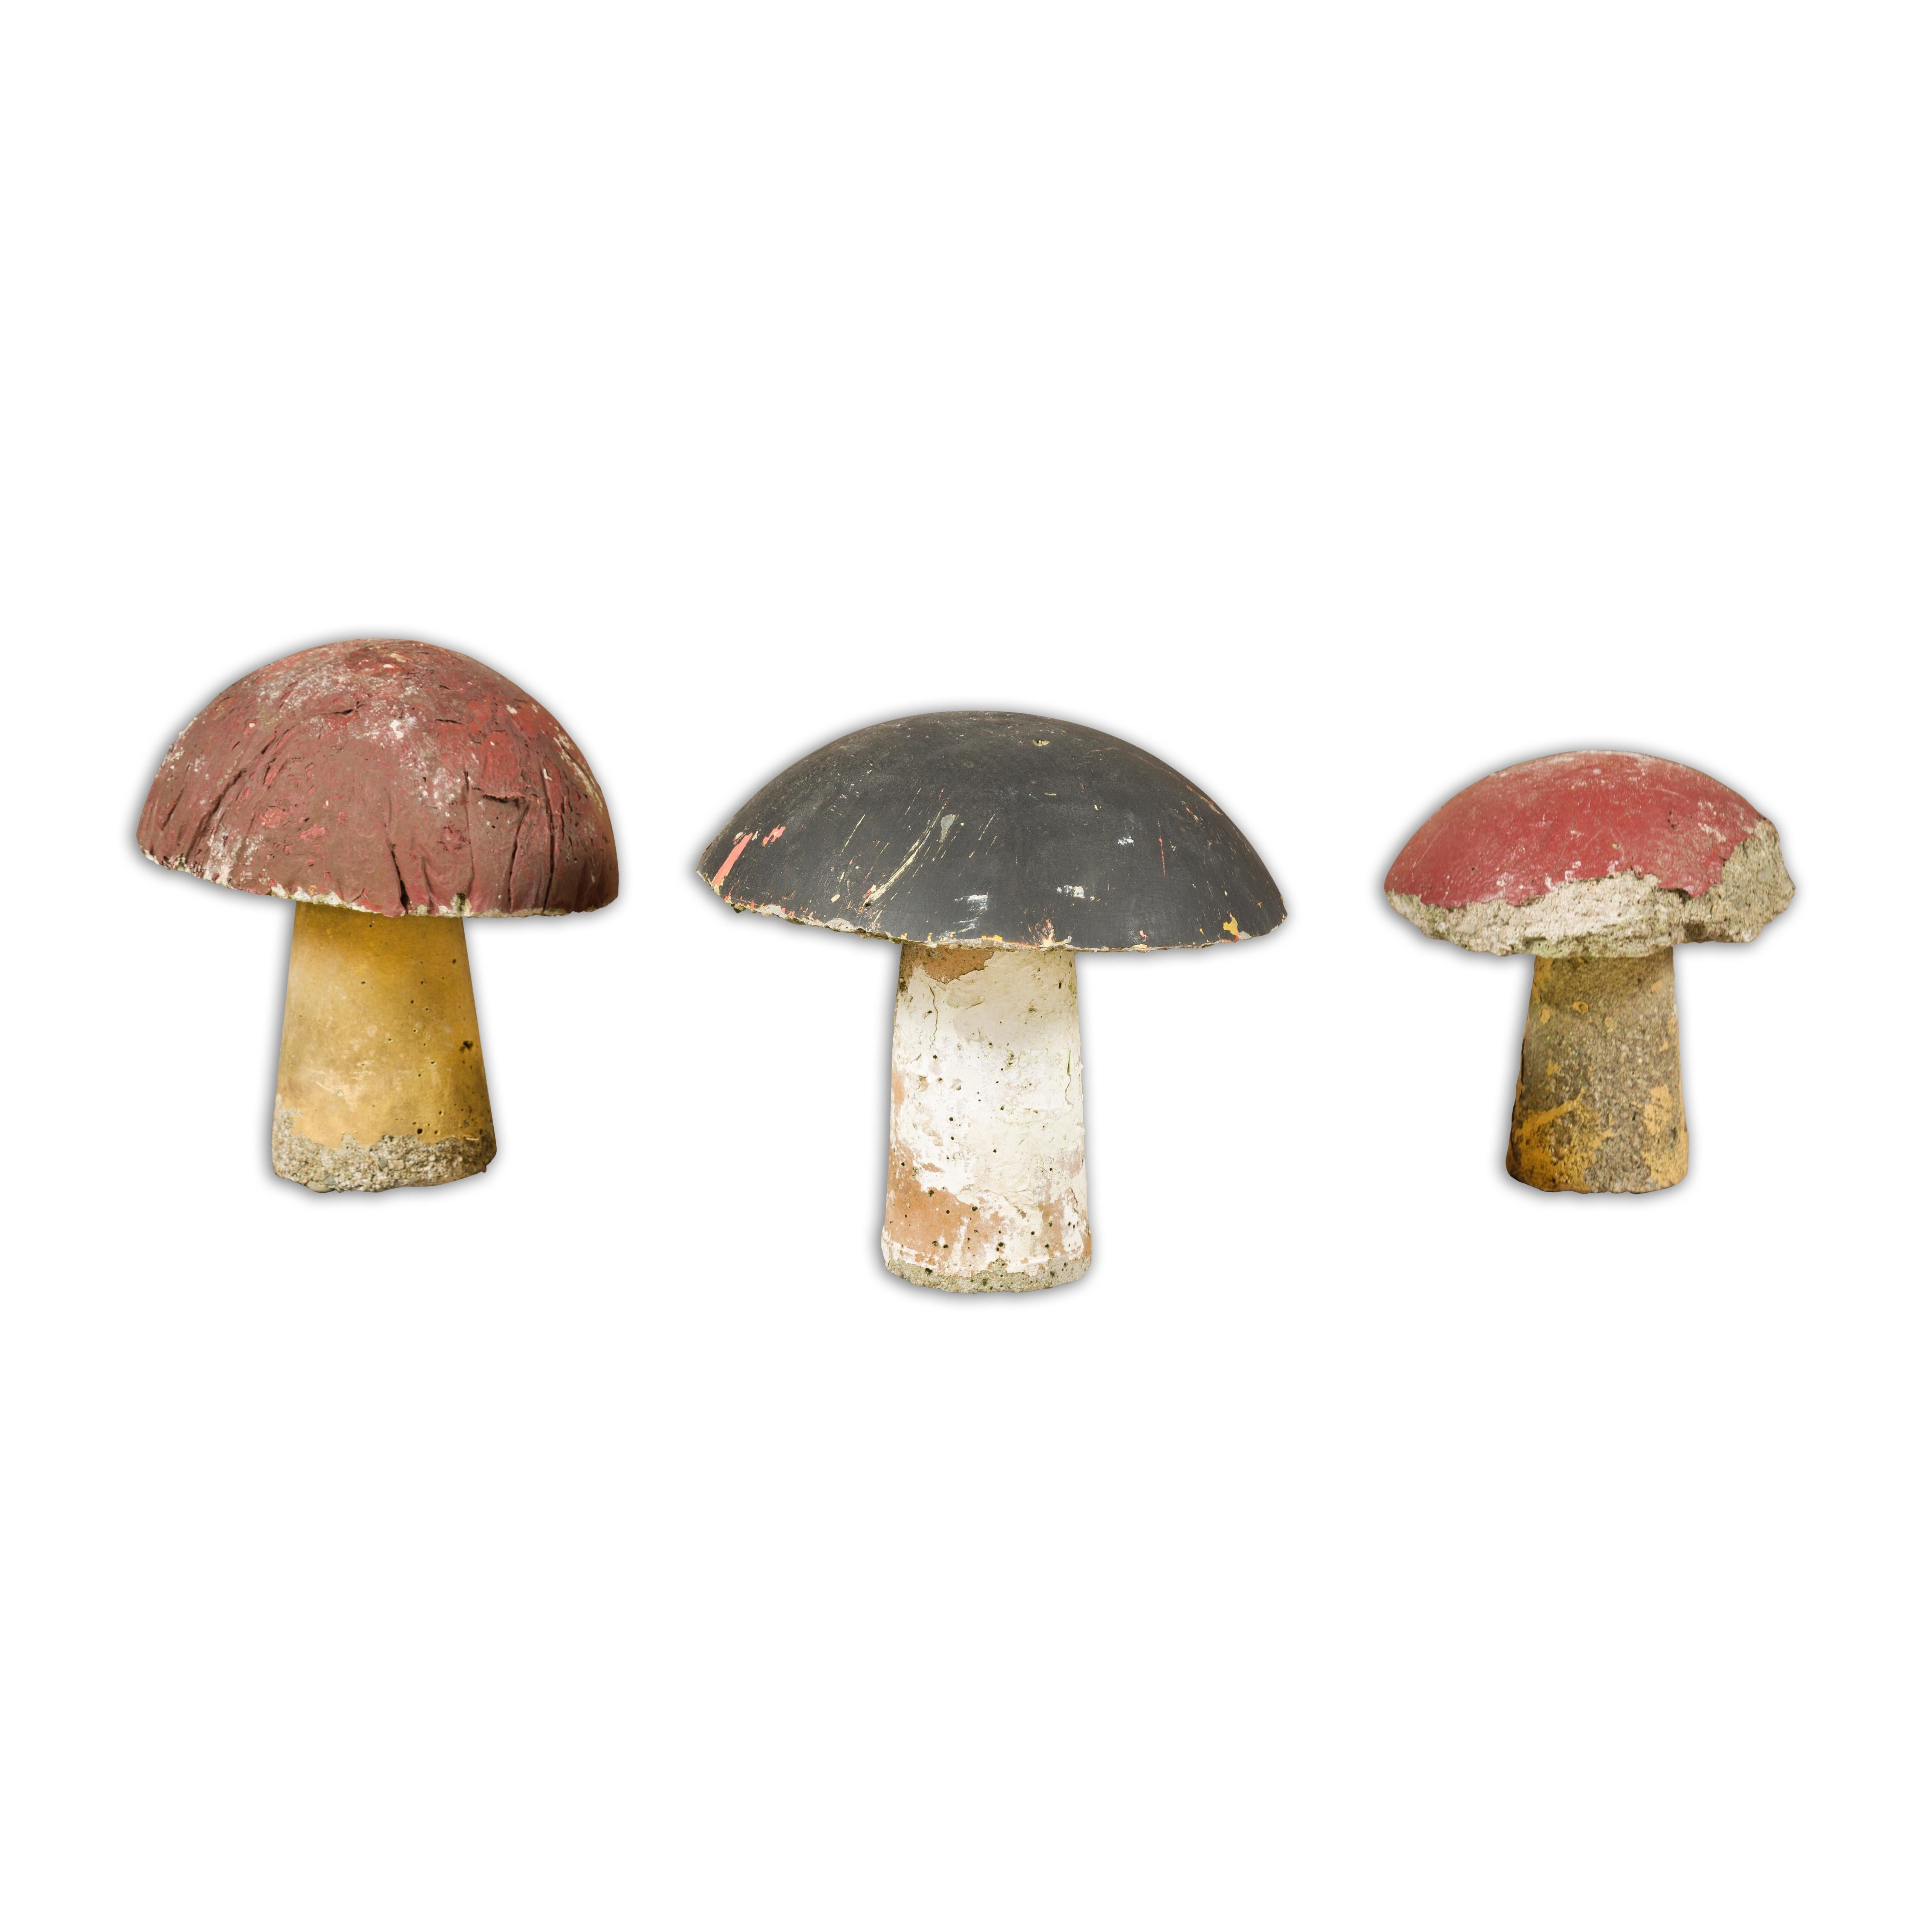 A set of three American Midcentury painted concrete mushroom garden ornaments with red and black tops and nicely weathered appearance. Envelop your garden in a veil of enchantment with this set of three American Midcentury painted concrete mushroom